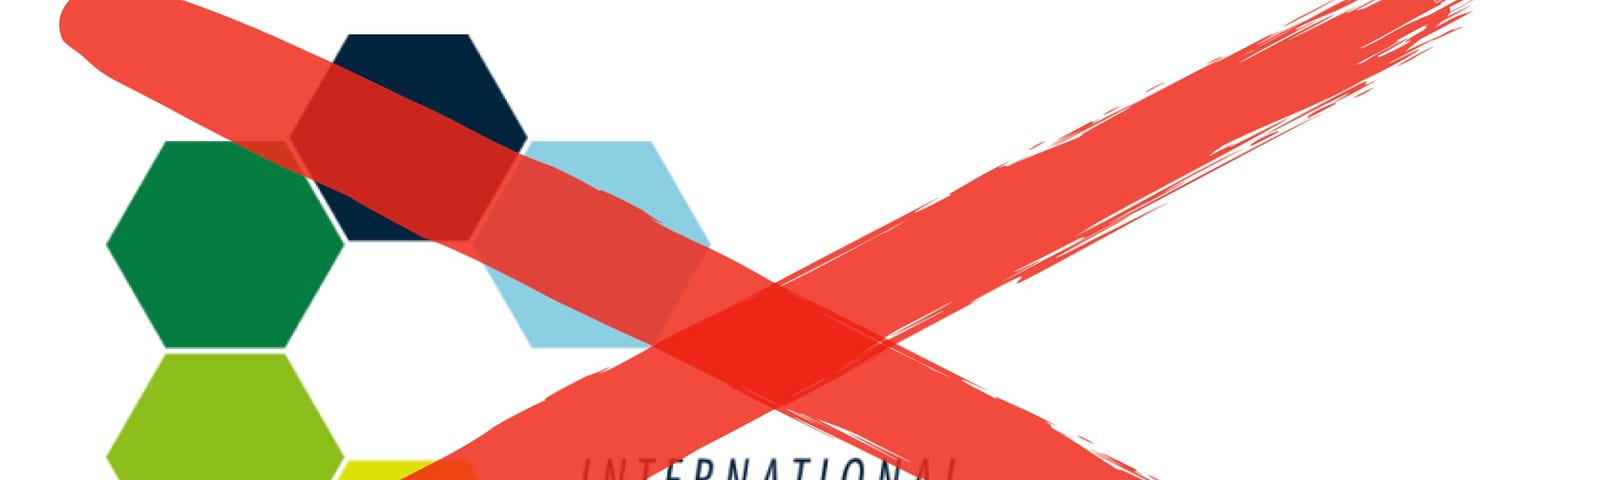 IMAGE: The International Energy Charter Treaty logo appears crossed by two thick diagonal red lines